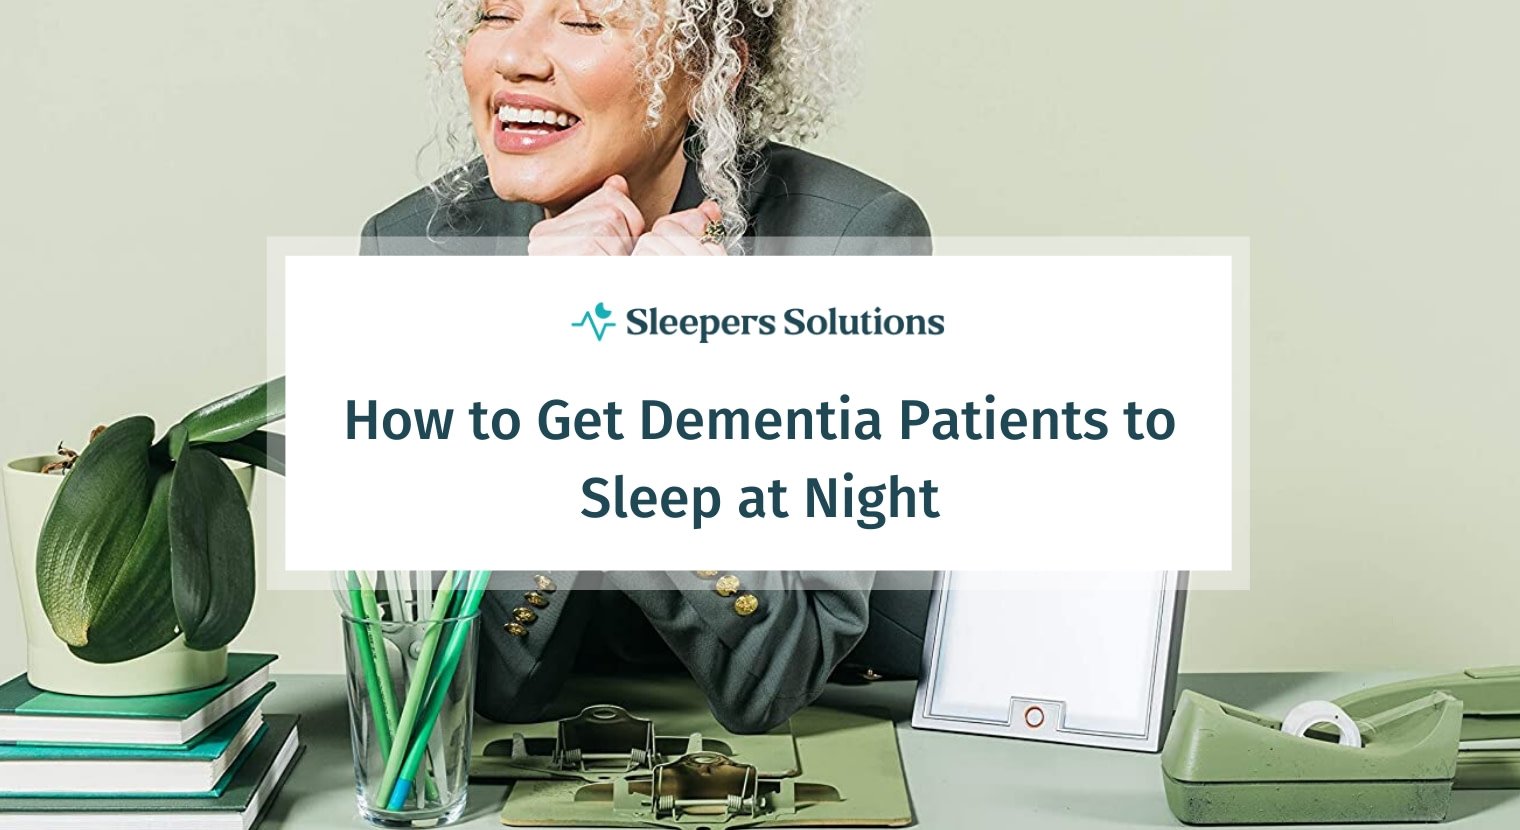 How to Get Dementia Patients to Sleep at Night